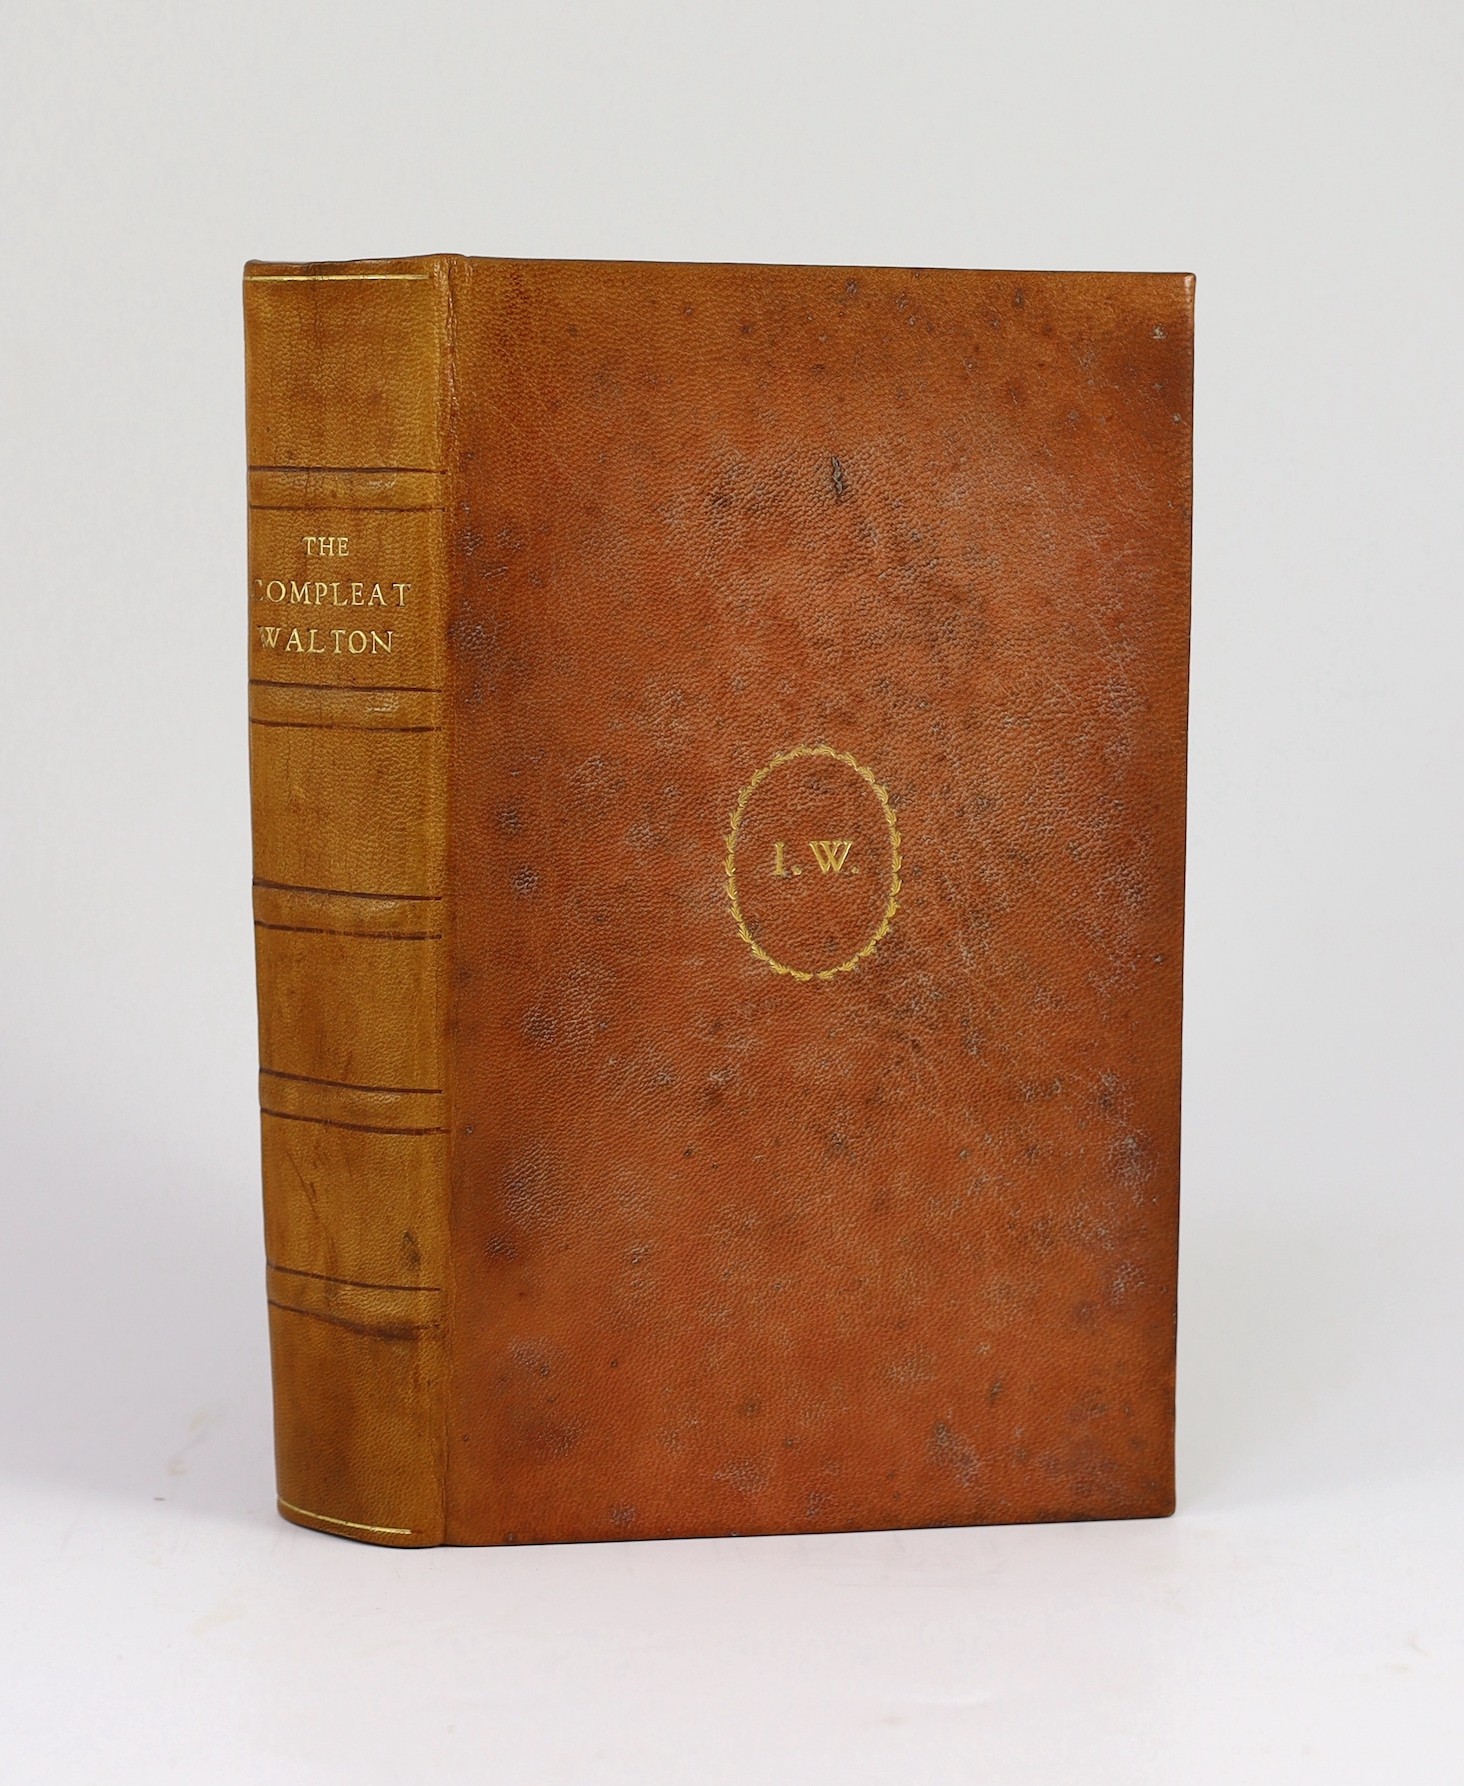 Nonesuch Press - London - Walton, Izaak - The Compleat Angler, one of 1600, 8vo, tan morocco, front board with gilt monograms ‘’I.W.’’ within an oval cartouche, 1929